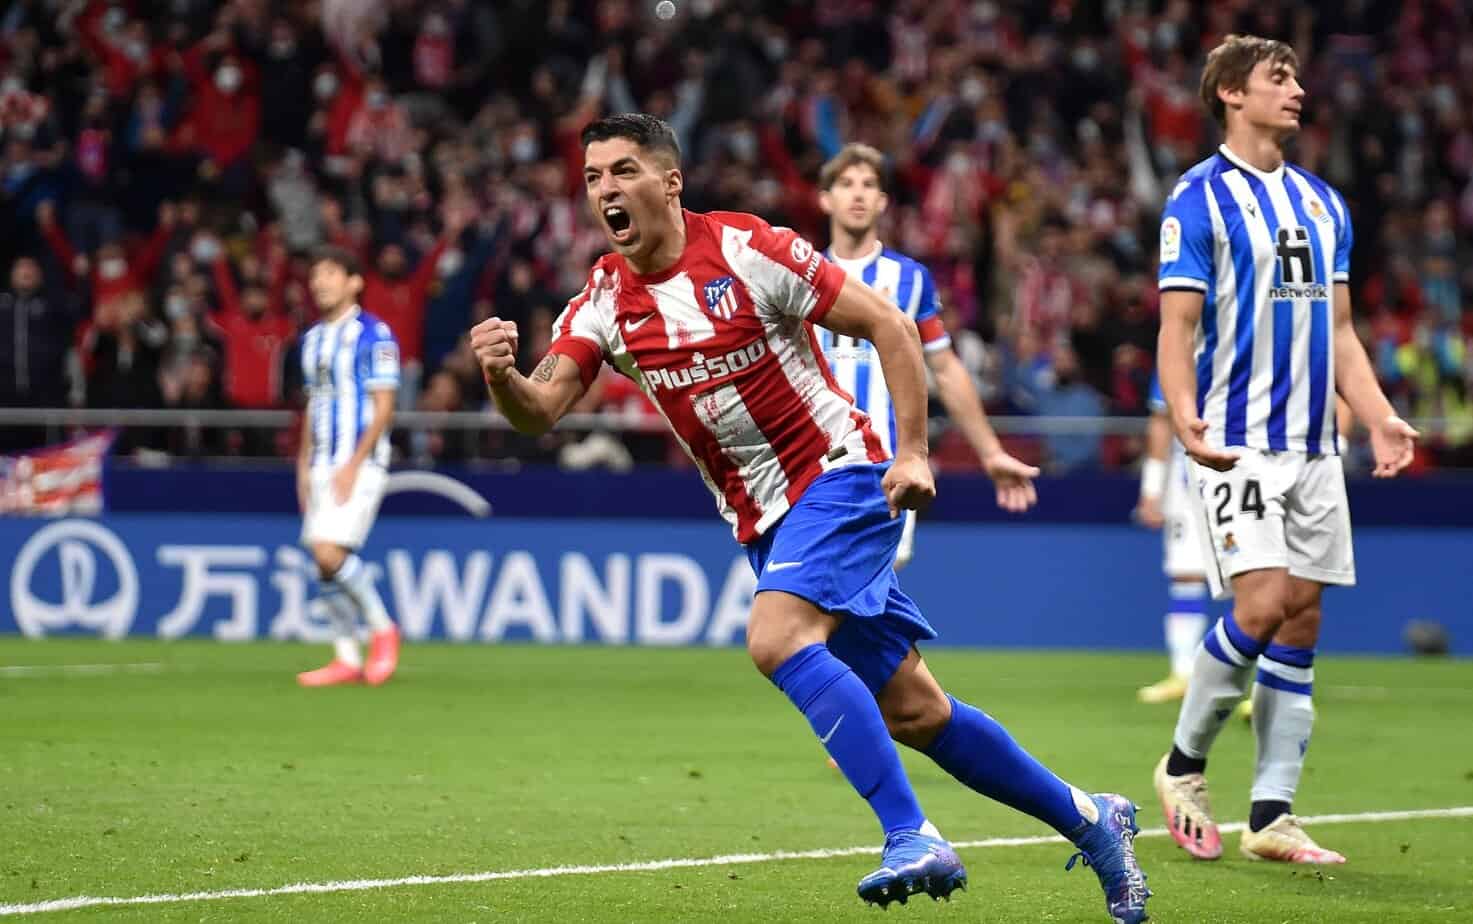 Real Sociedad vs. Atlético Madrid – Betting Odds and Free Pick